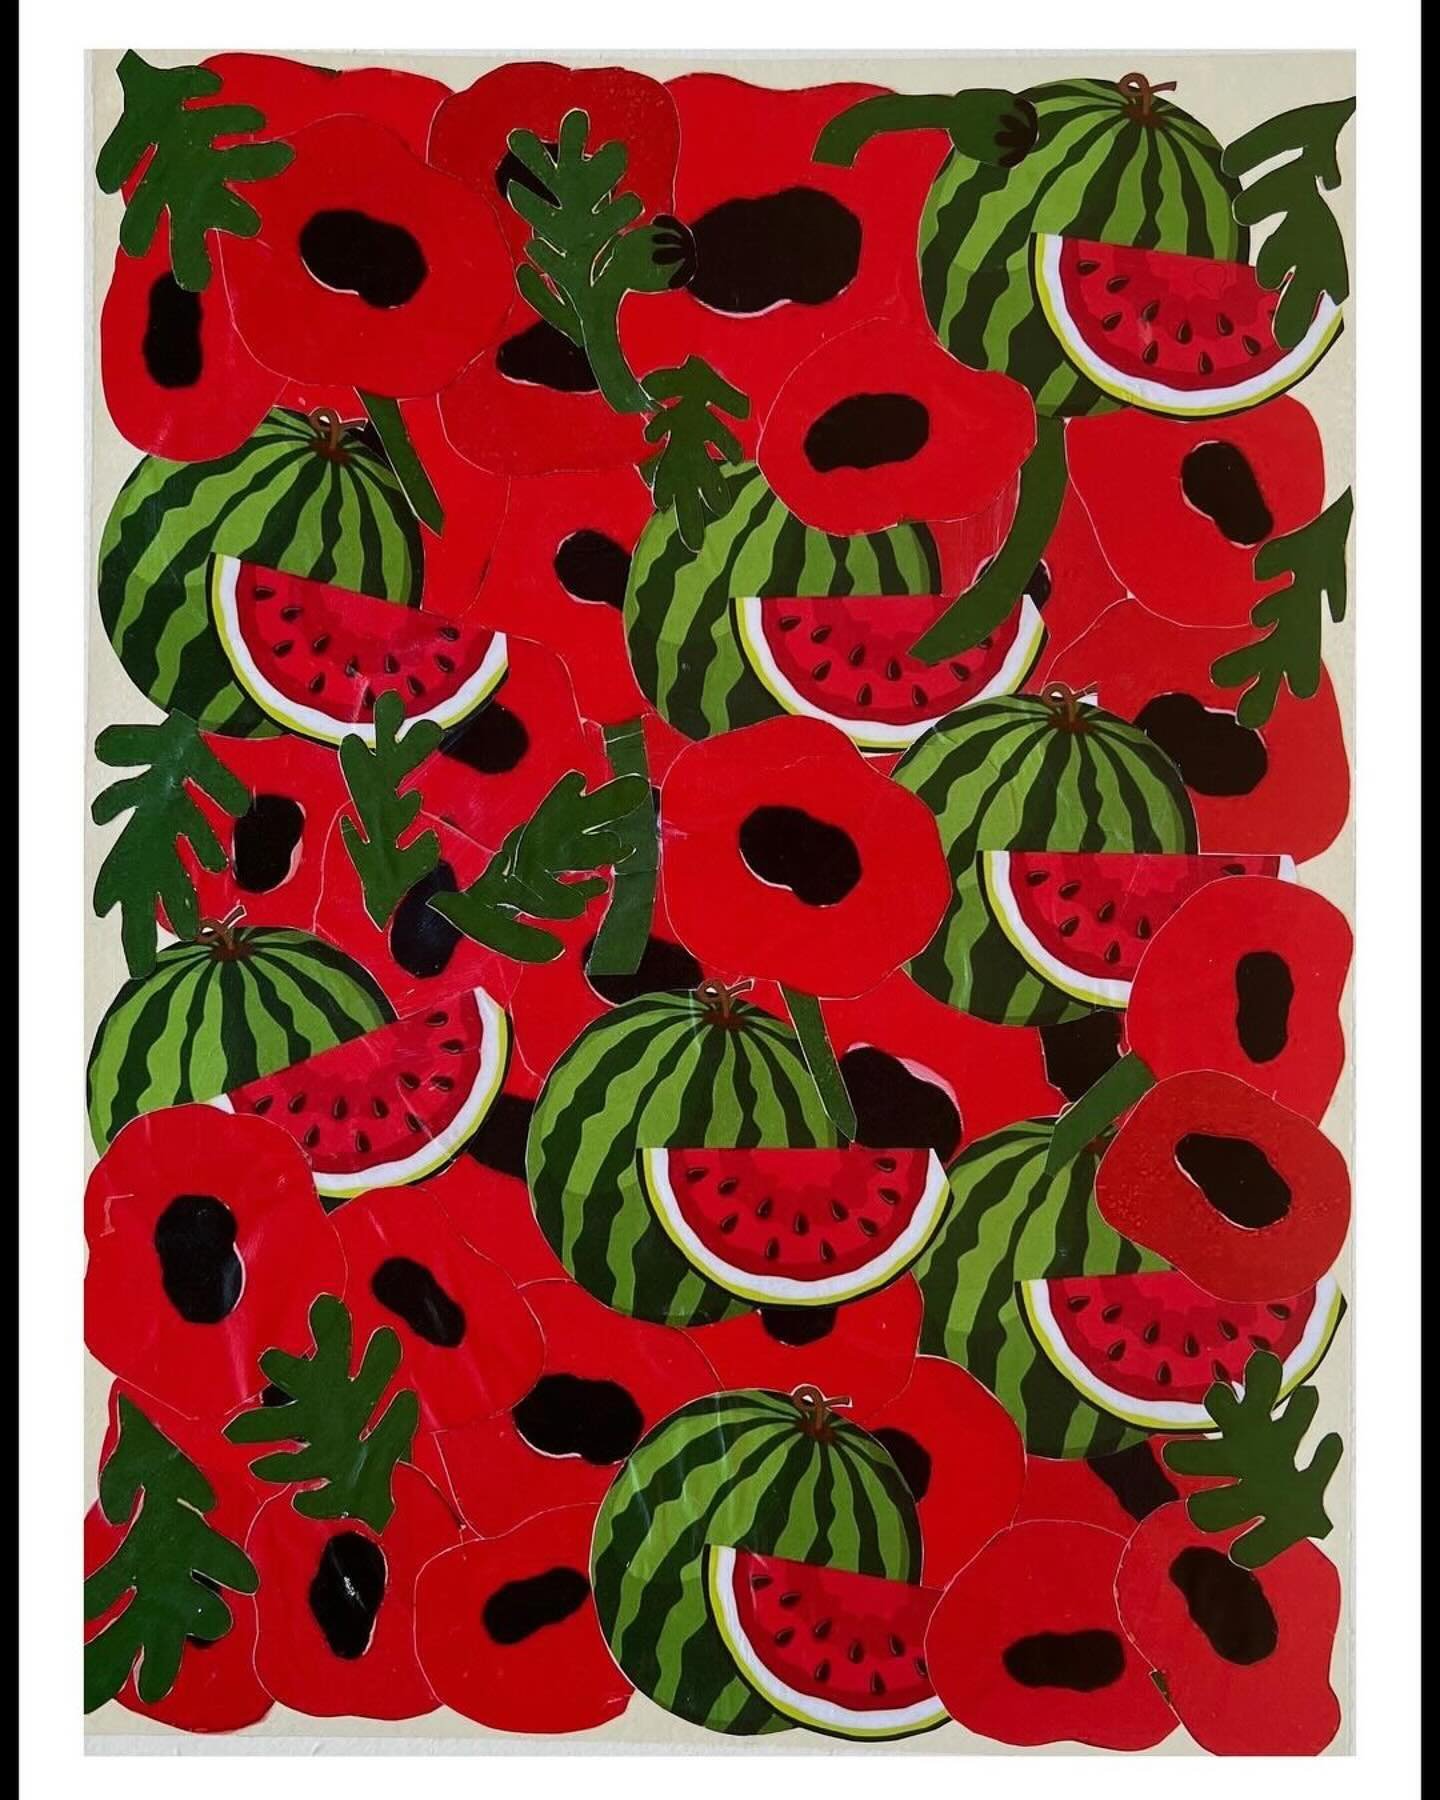 #Repost @shereenodeh_art
・・・
We need to keep posting and talking about Palestine 🇵🇸🍉 Post Talk Share !  #art #artist #watermelonart #artstudio #artgallery #artcollector #collageart #paper #watermelons #poppies #red #arabart #artdaily #artoftheday 